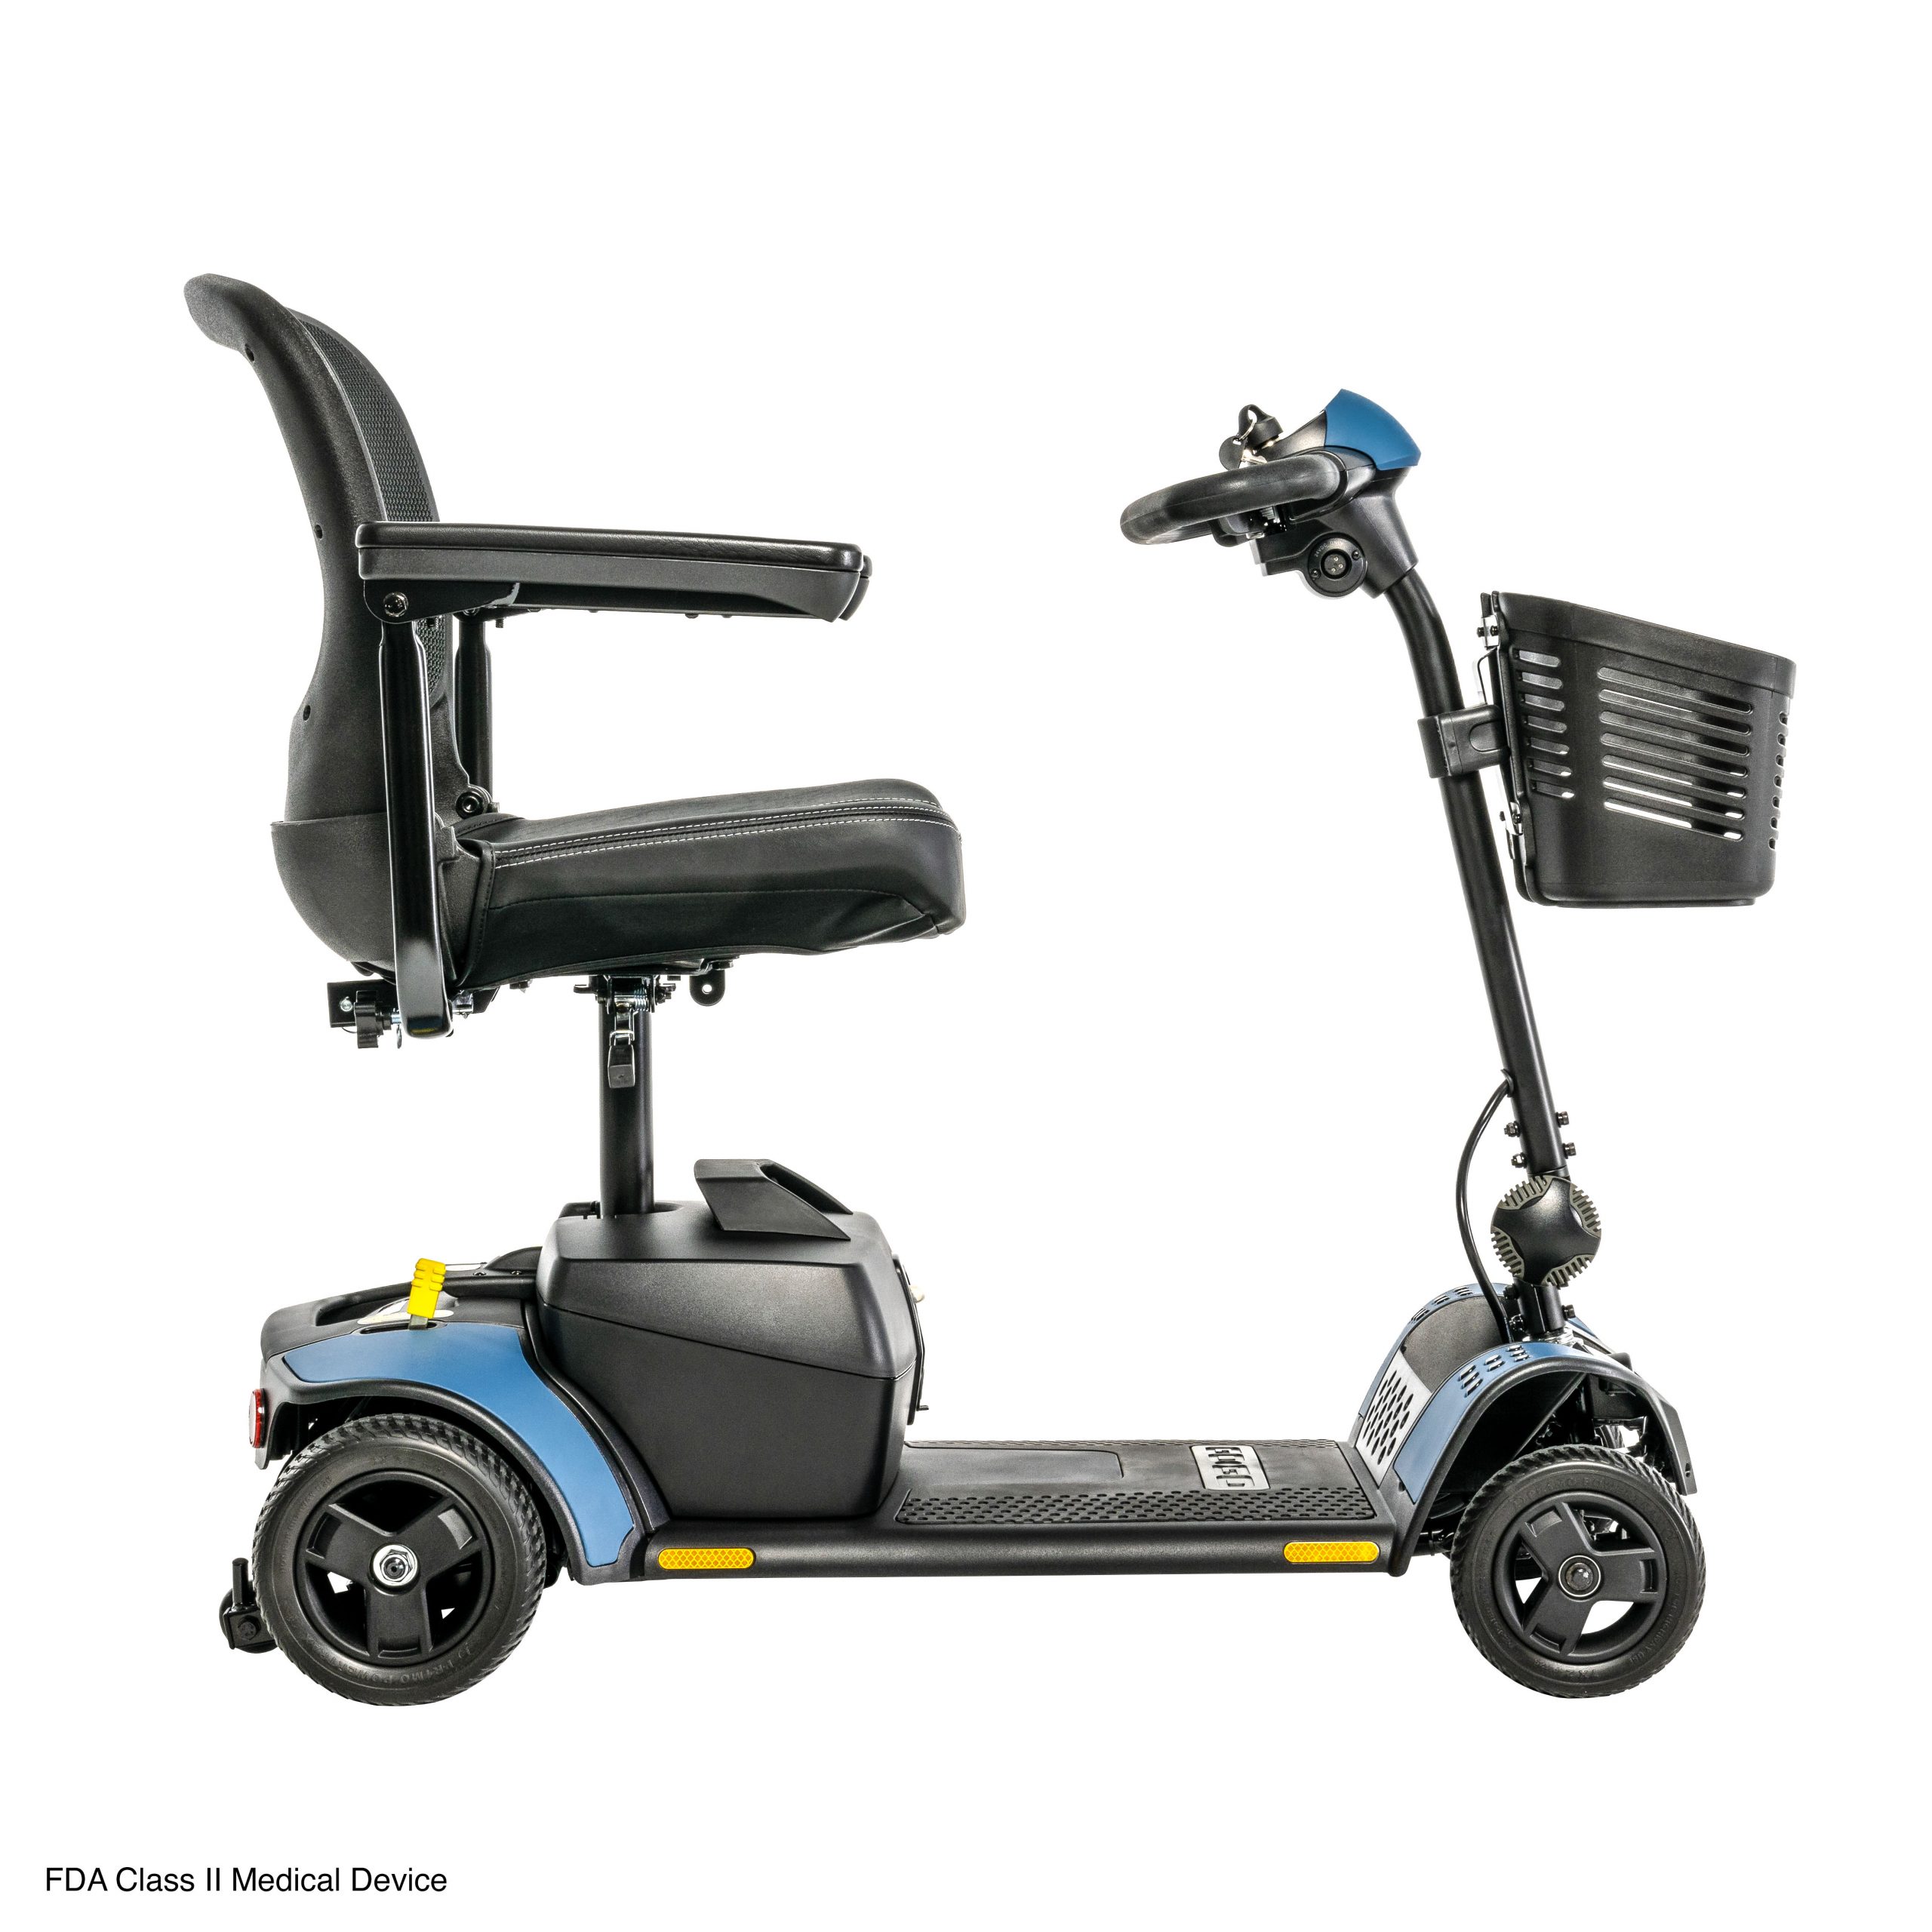 Right side view of the blue Go-Go Elite Traveller 2 - Four-wheel mobility scooter with a user-friendly control panel, tight turning radius, and a comfortable swivel seat with removable colored panels